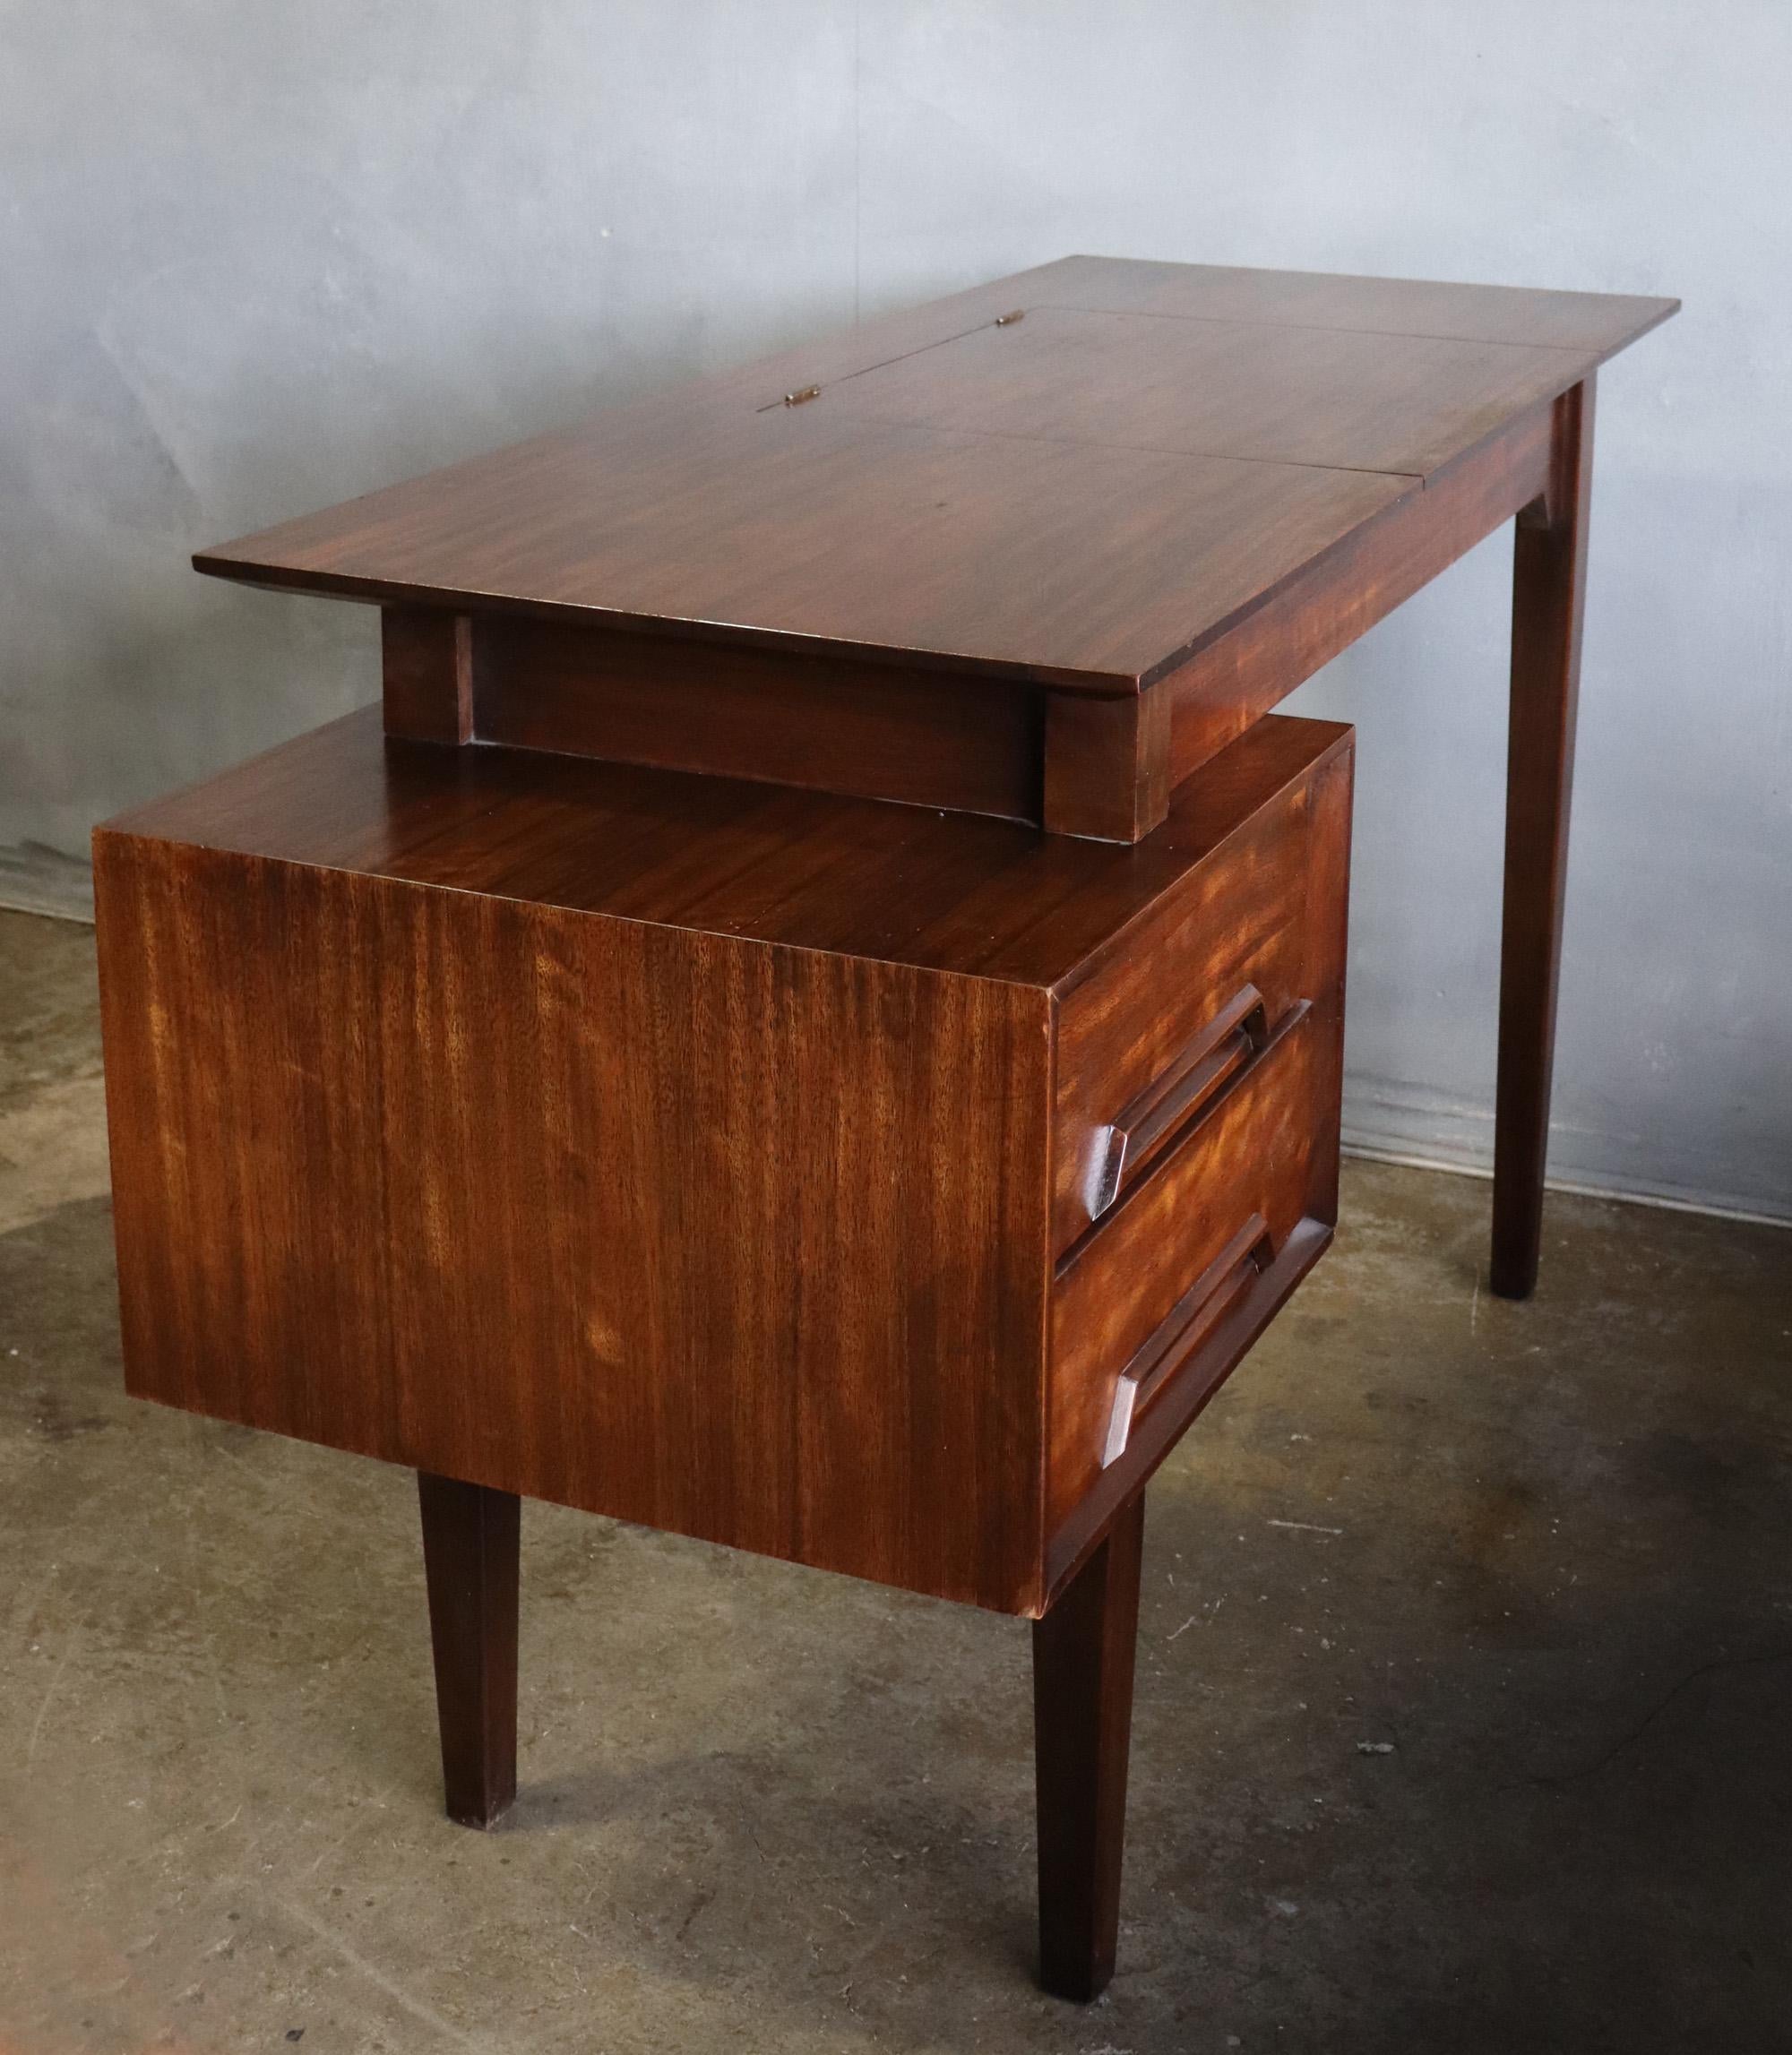 For your consideration is this rare Mid-Century Modern floating top desk from the Perspective collection by Milo Baughman for Drexel in 1951. Crafted from exotic Mindoro wood imported from the Philippines, it features a floating top with hidden